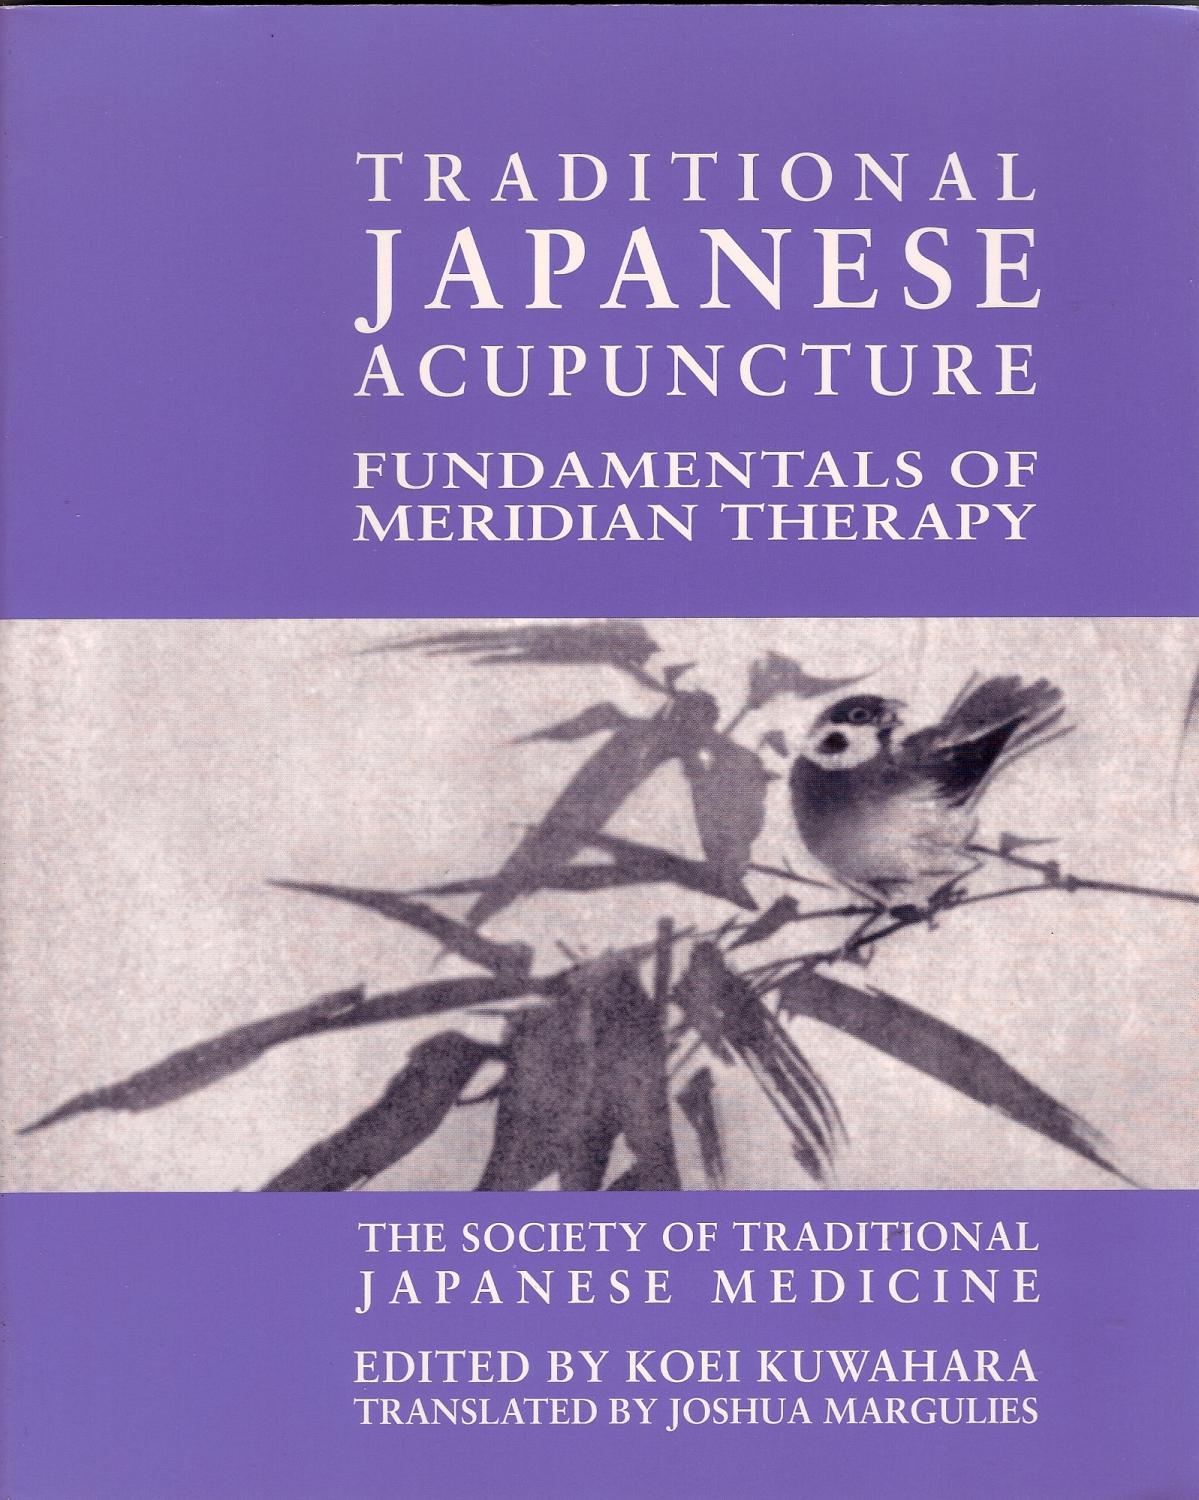 Koei Kuwahara - Traditional Japanese Acupuncture Fundamentals of Meridian Therapy